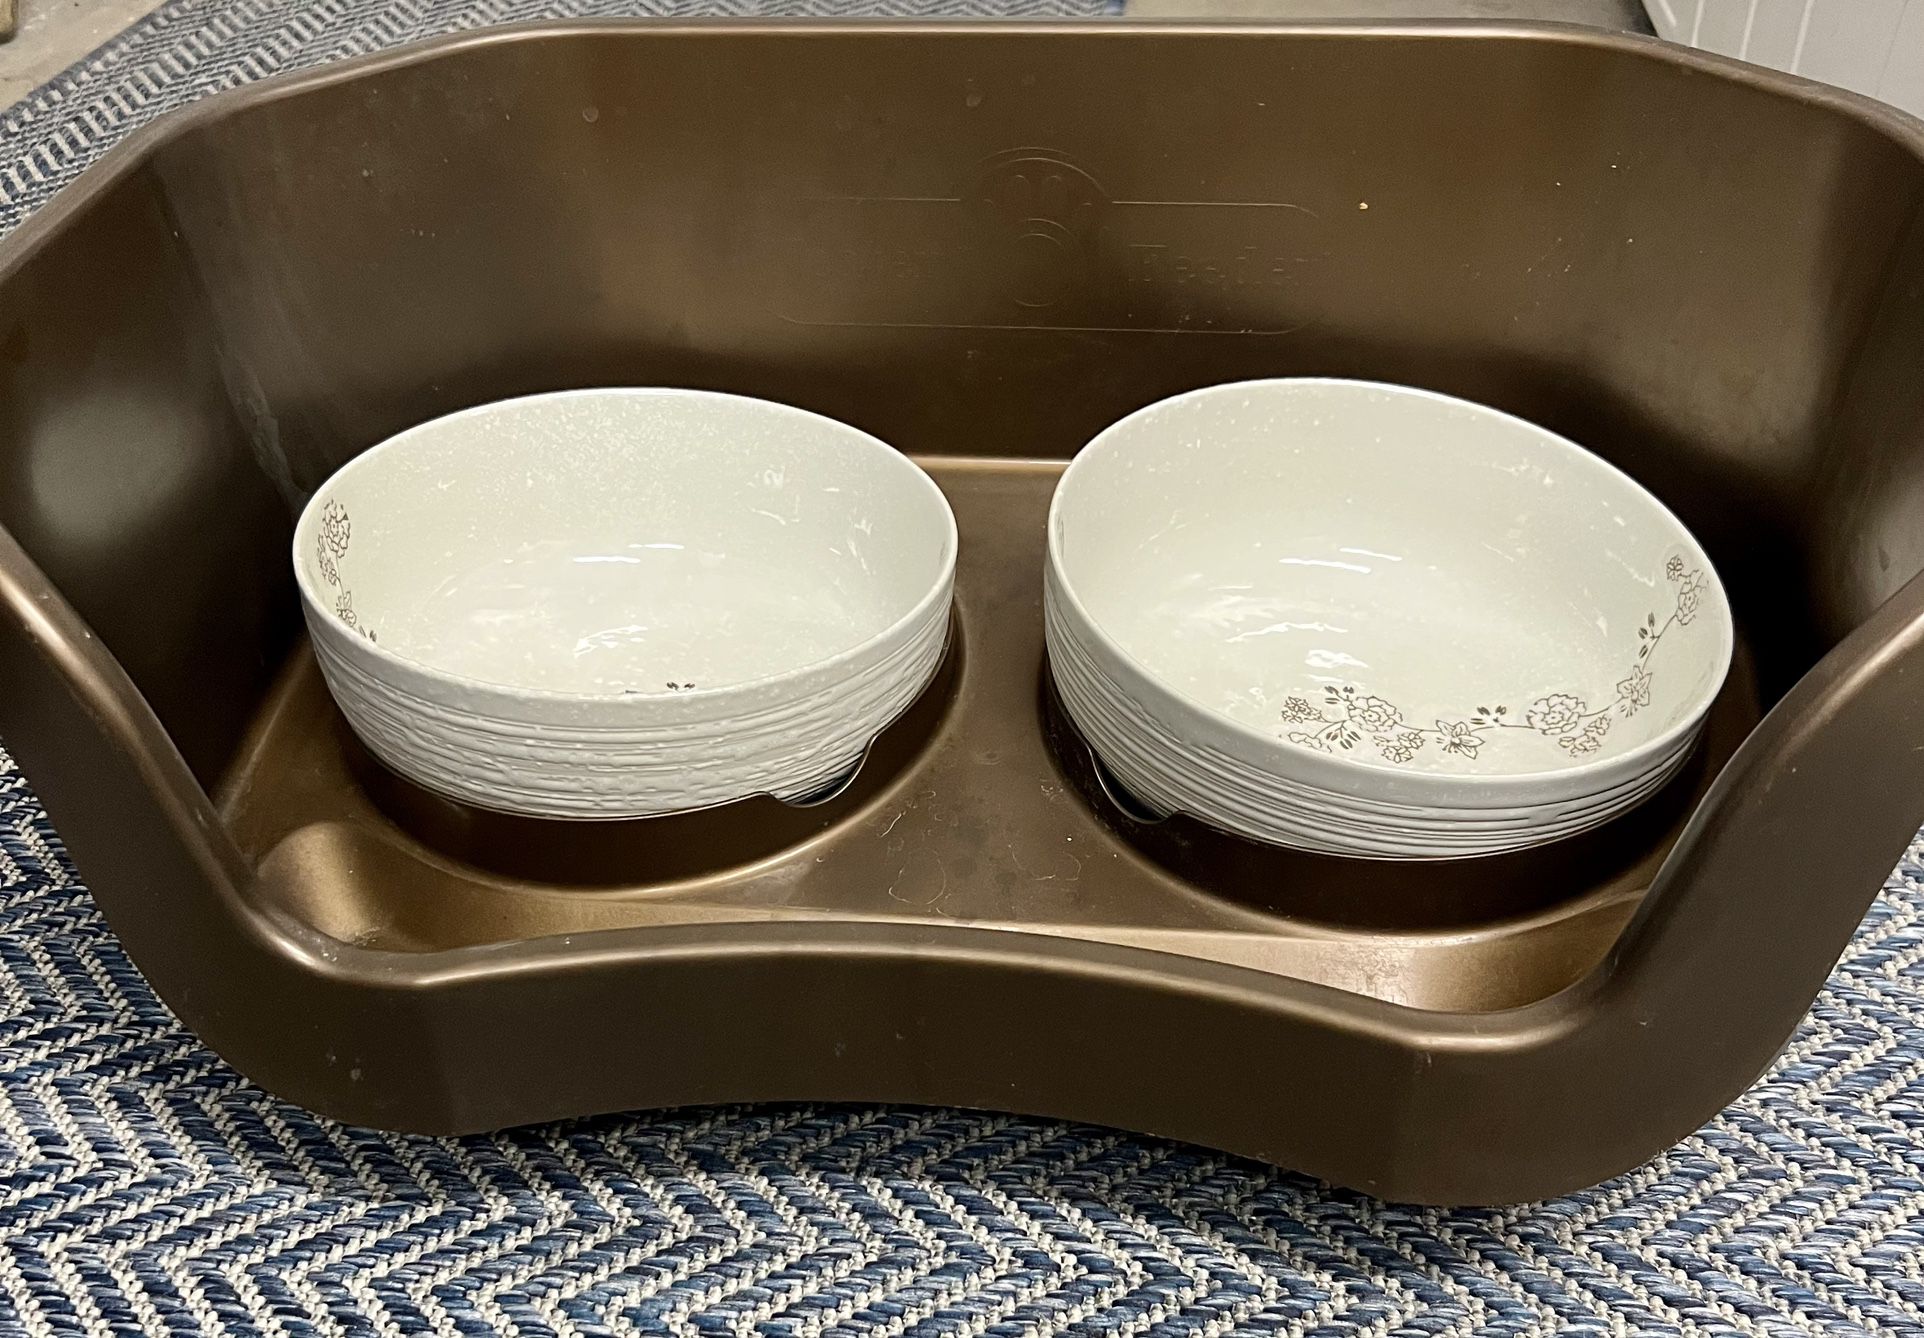 Lowered Price Dog Bowls With Tray For Sloppy Dogs